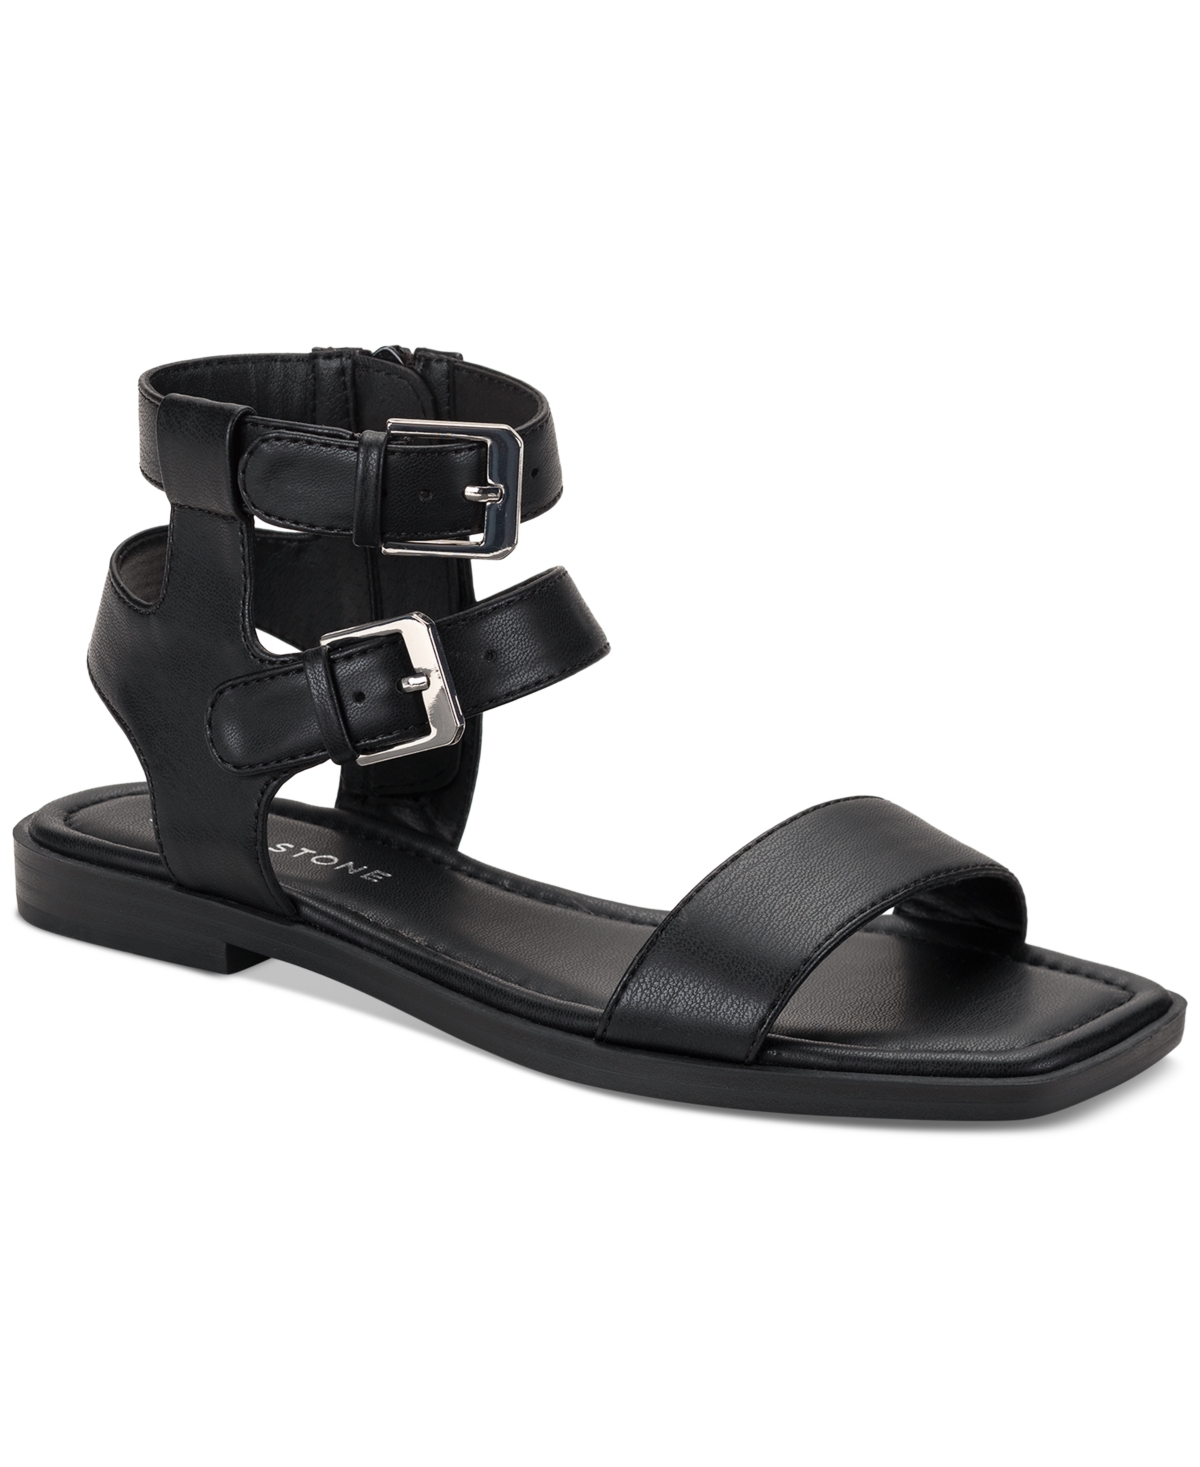 Monaaco Buckled Ankle-Strap Sandals, Created for Macy's - Nude